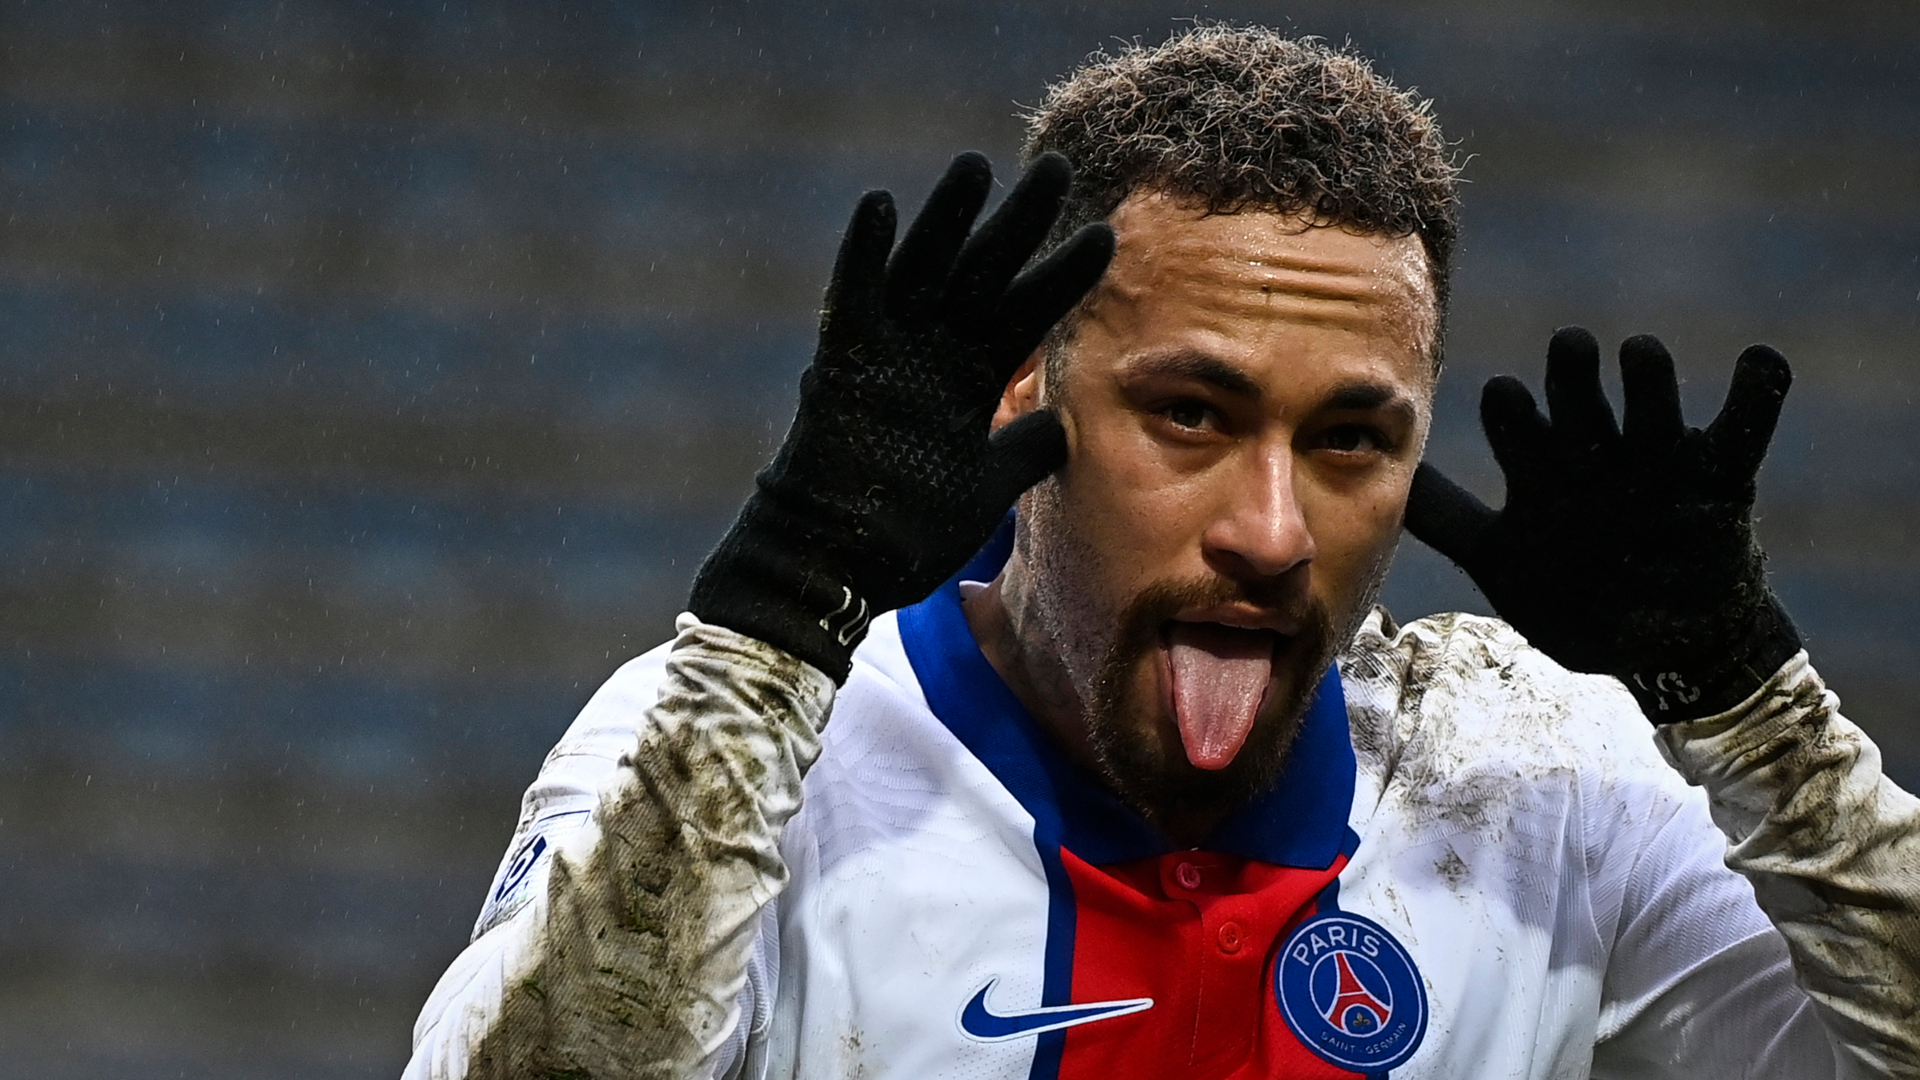 'I will never stop partying!' - Neymar dismisses 'immature' tag and insists he's well aware of PSG responsibilities